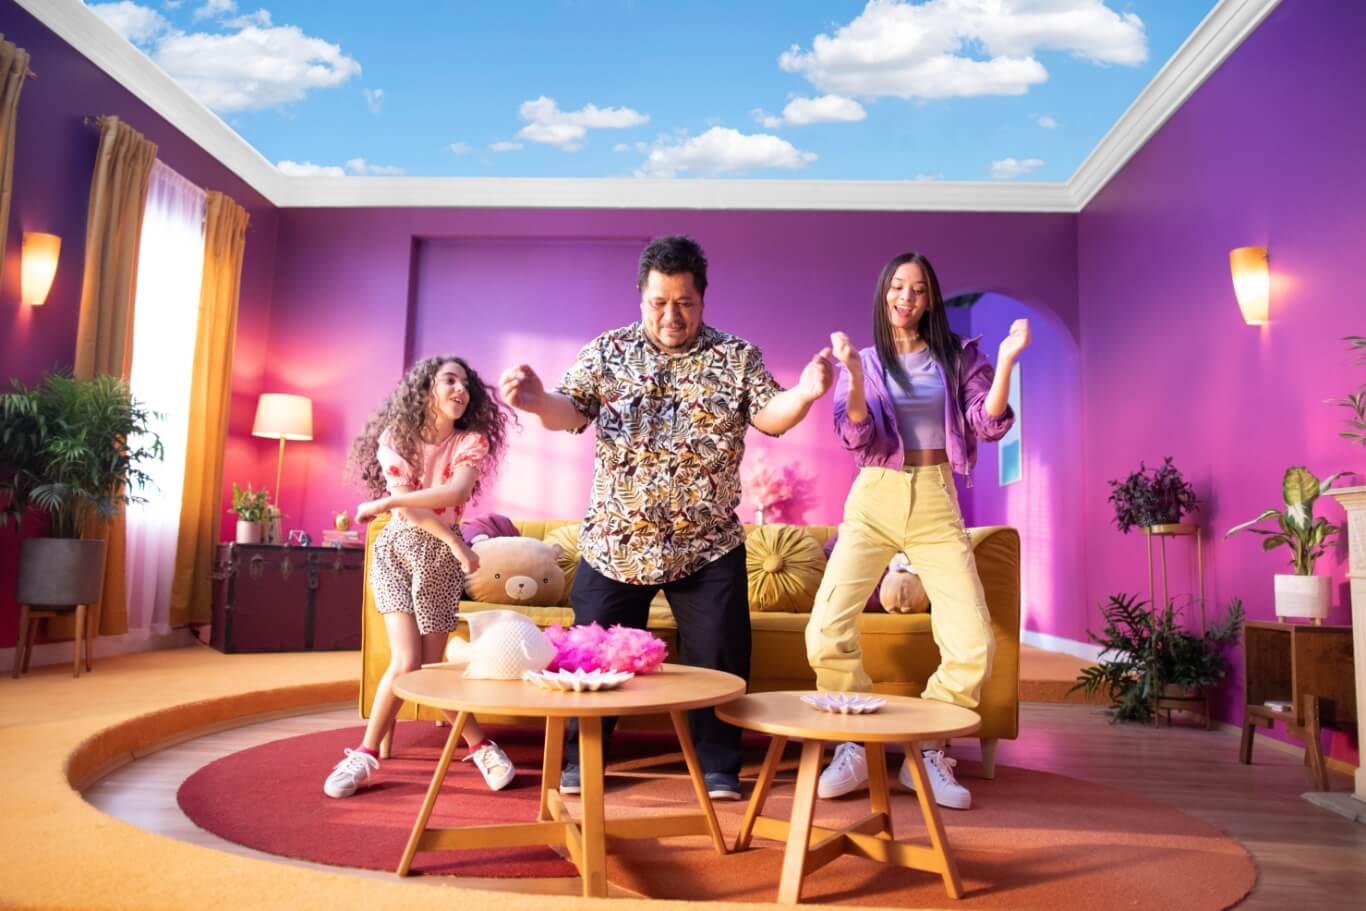 Family dancing in colorful living room with blue sky overhead